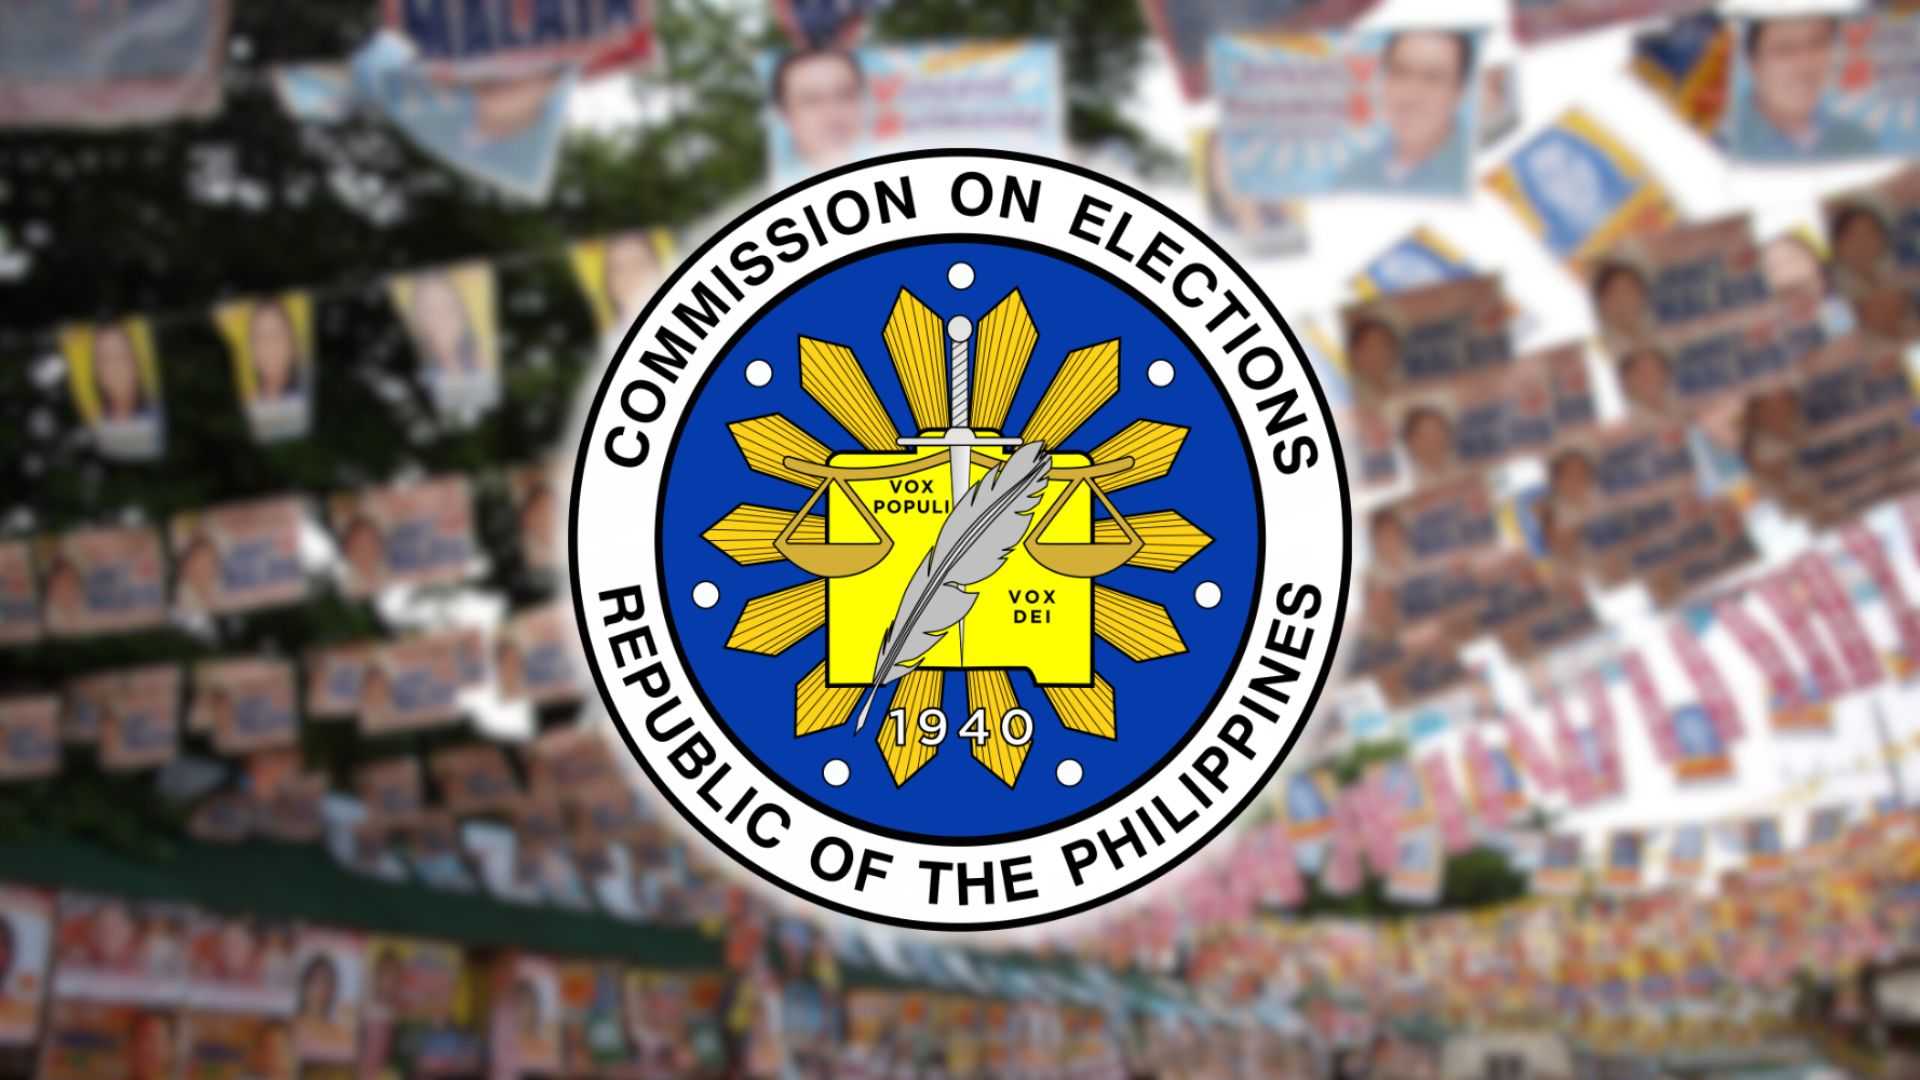 Comelec reminds BSK bets against campaign prohibitions